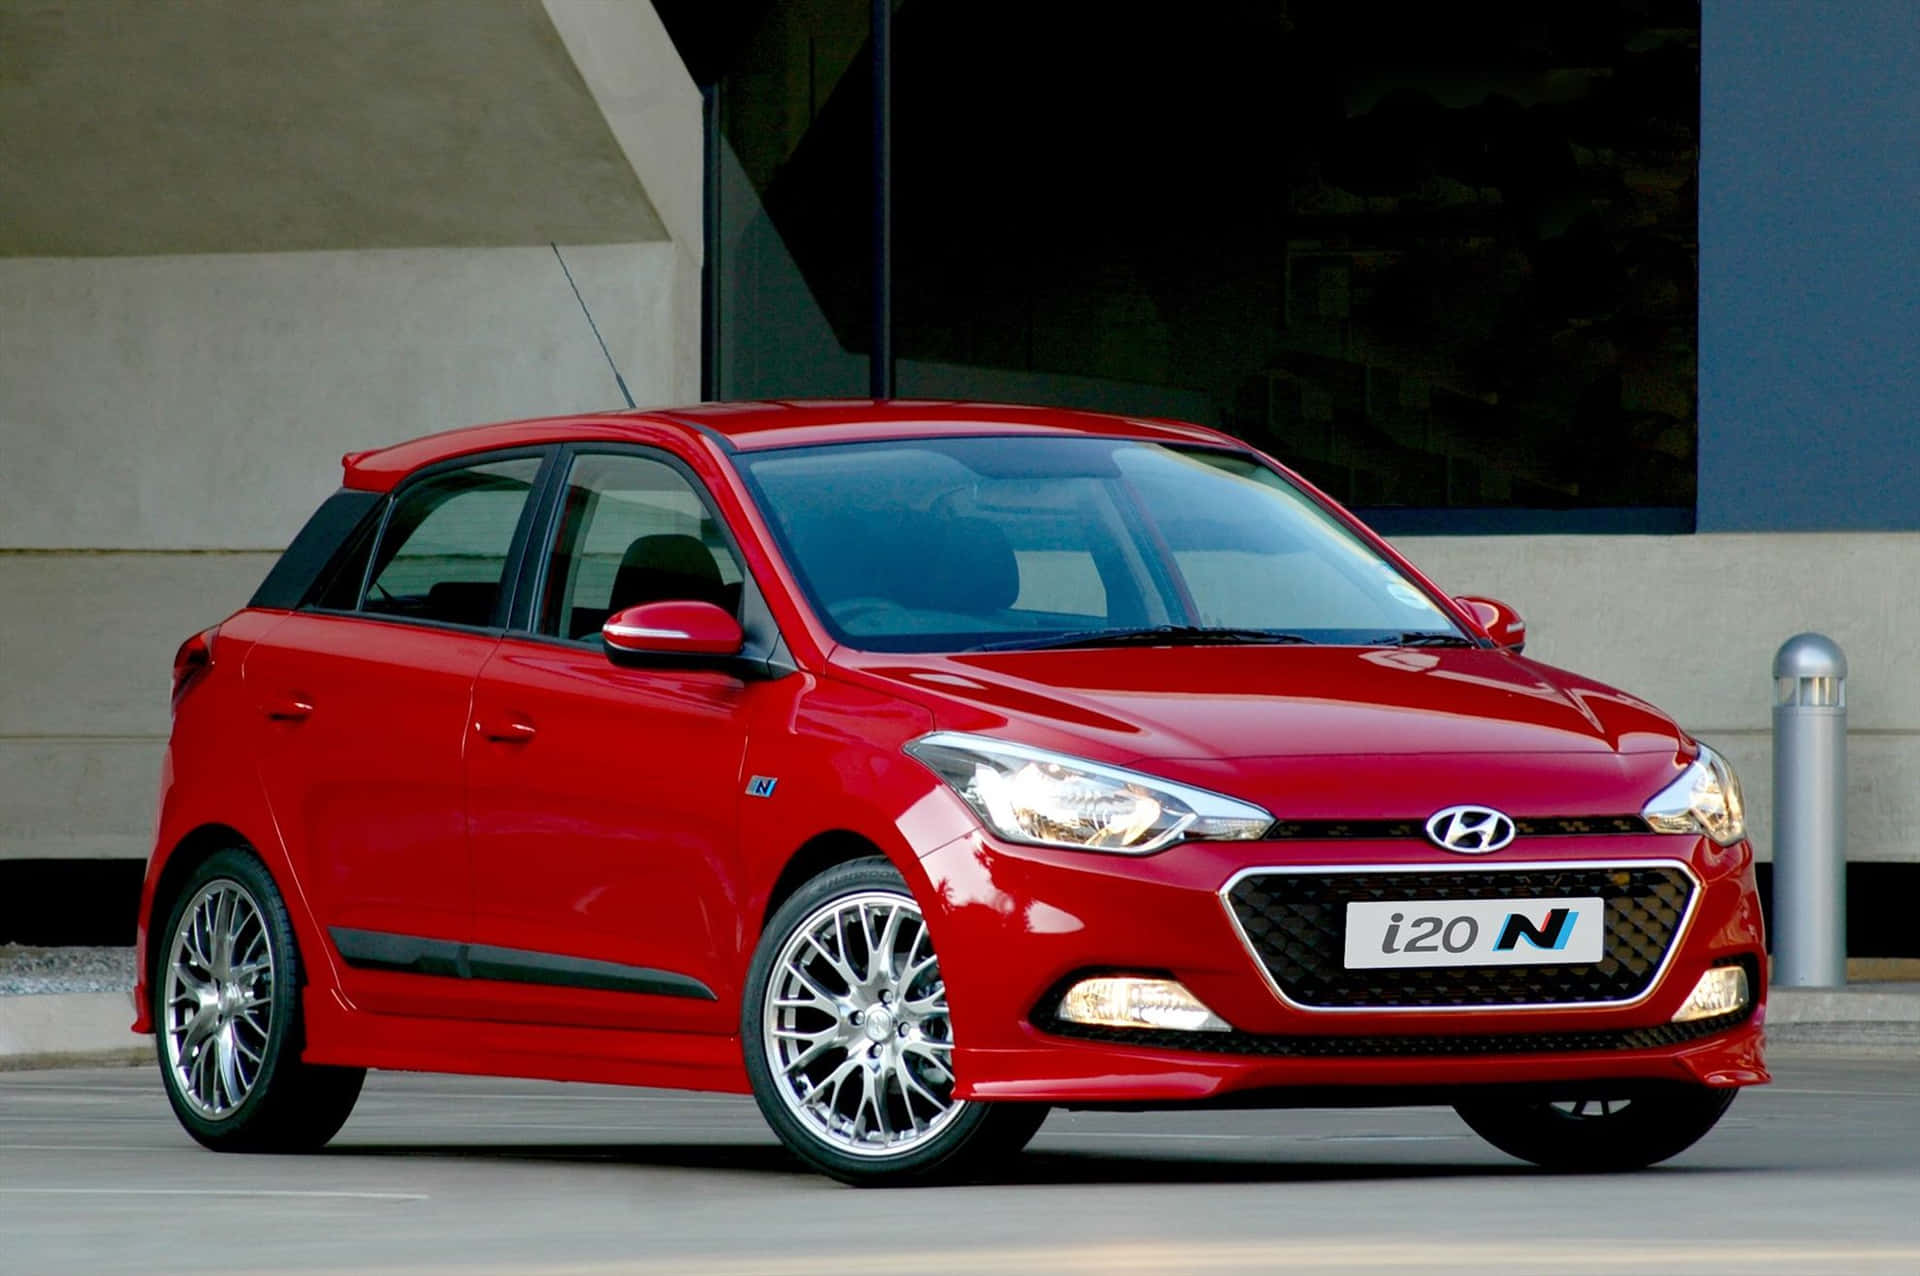 Hyundai Delivers a Great Combination of Style and Performance